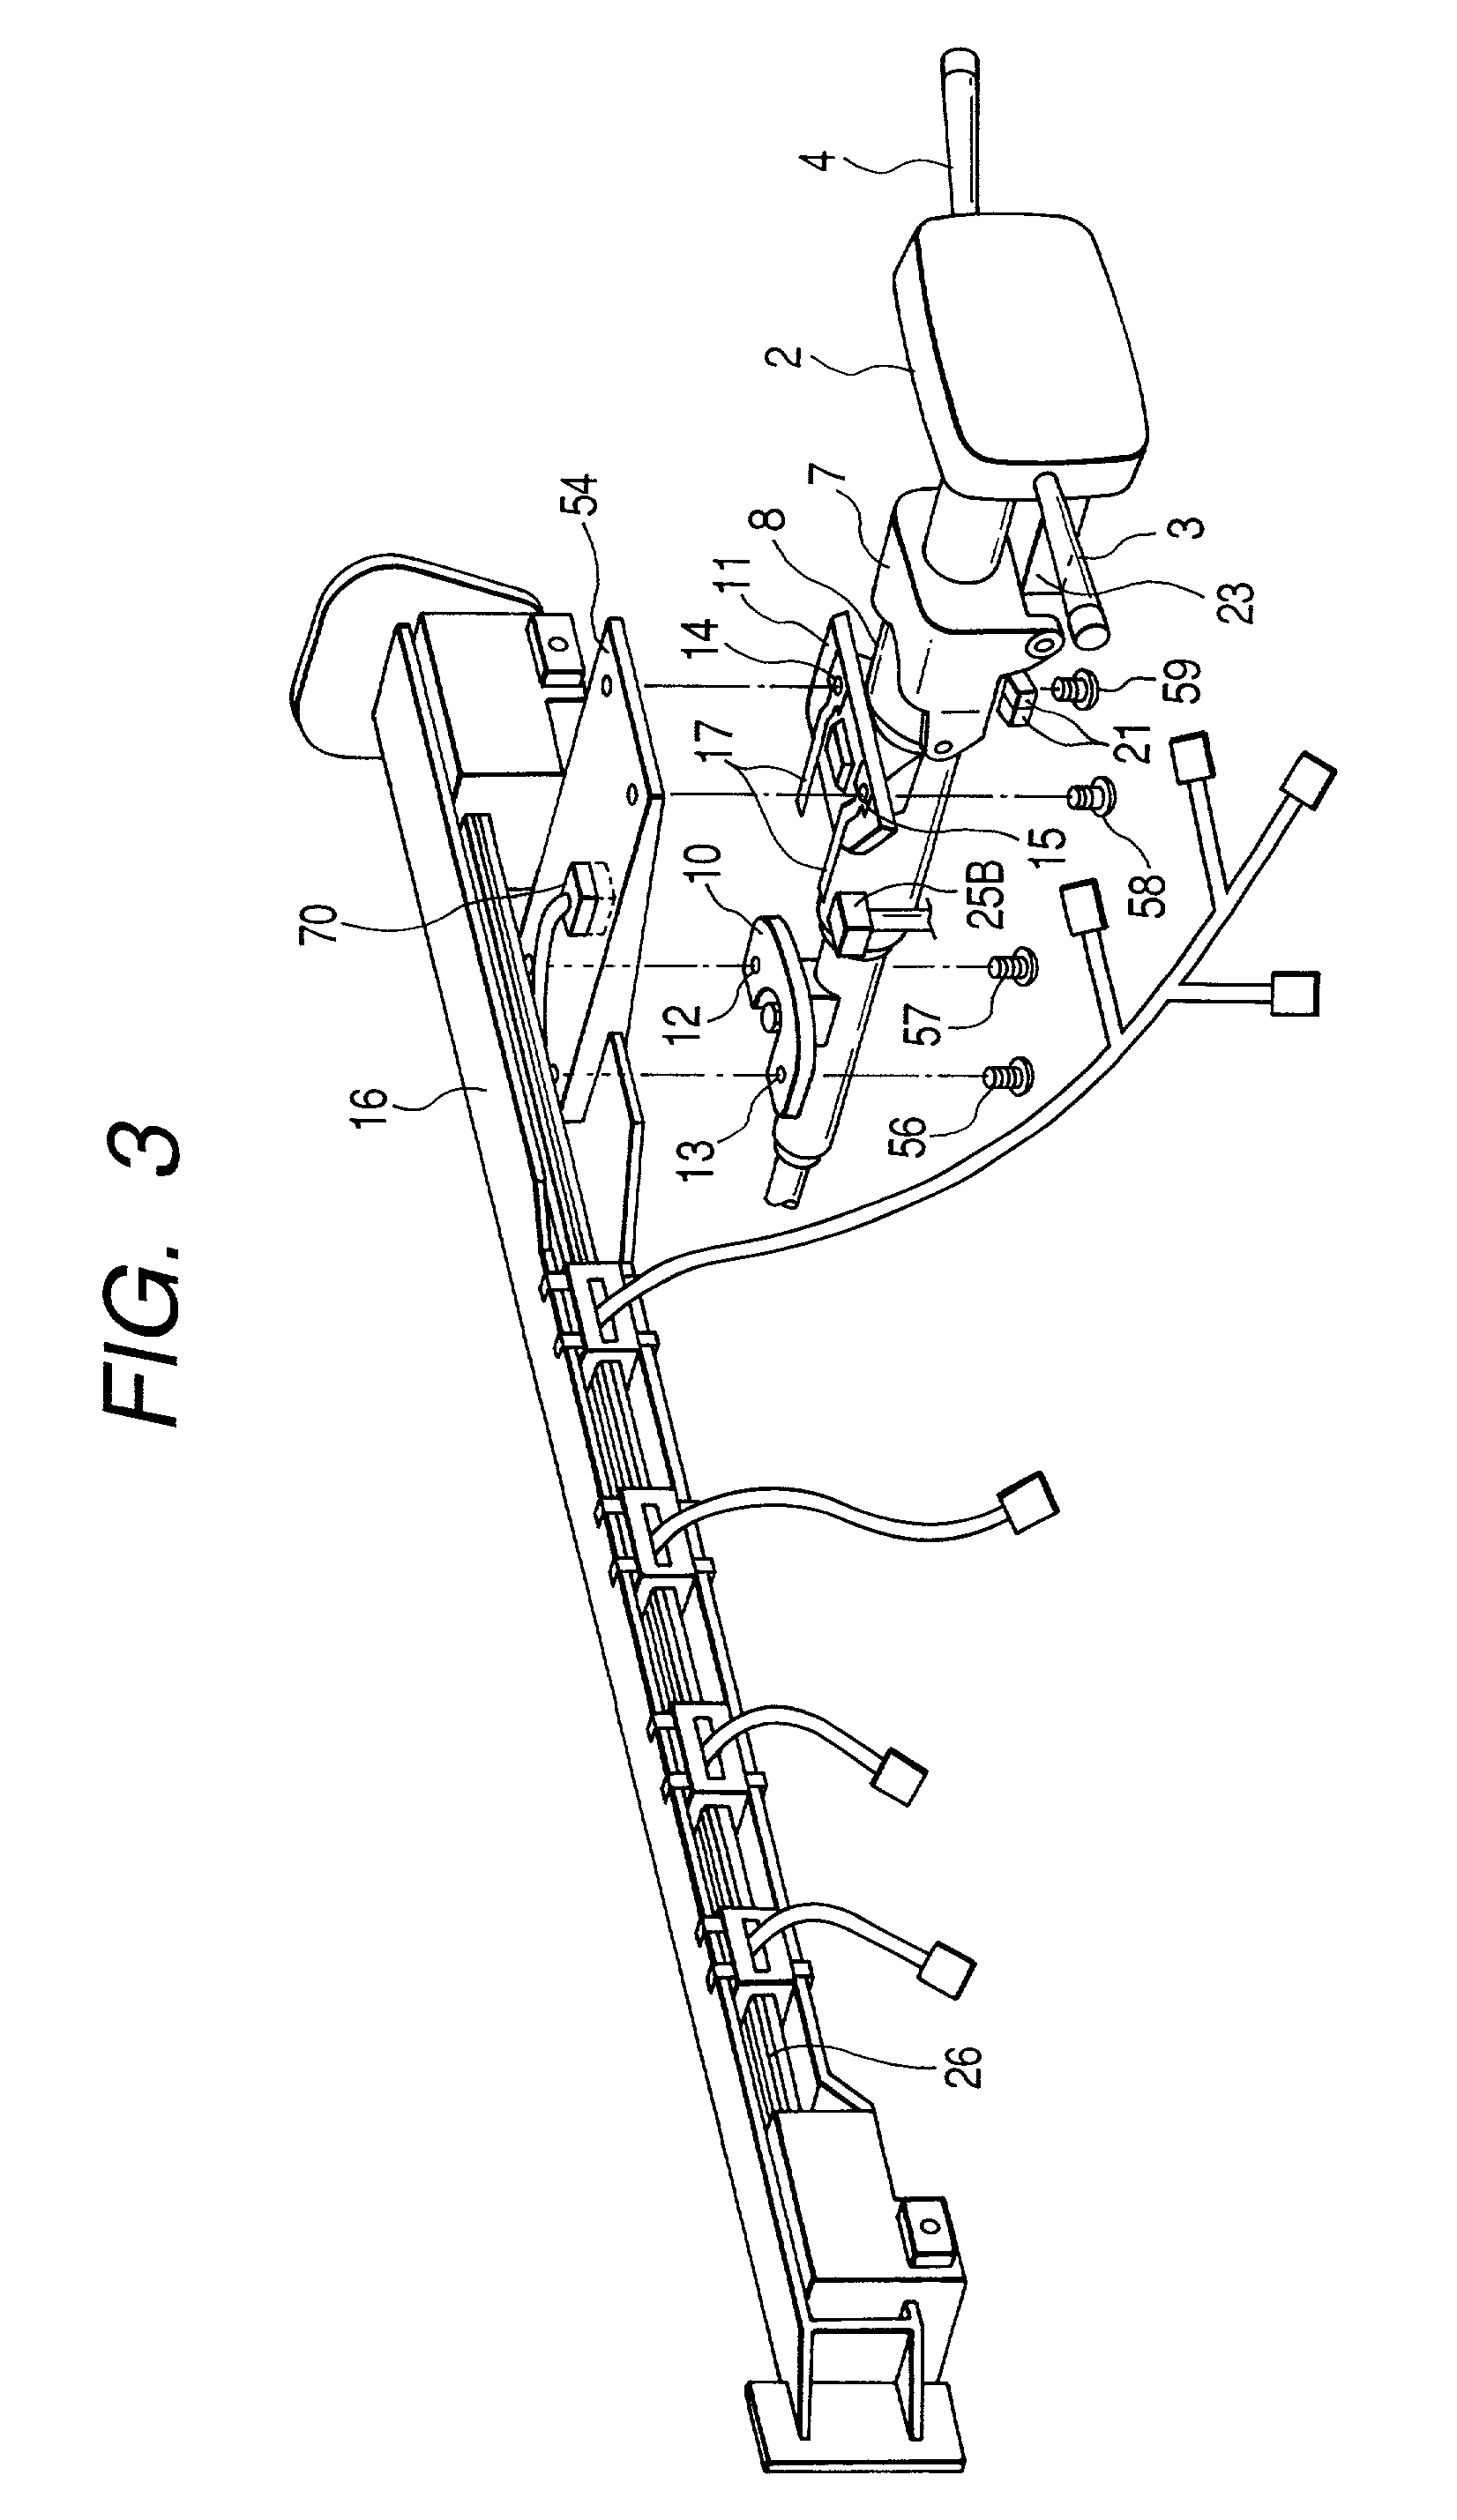 Steering wire harness, steering module, and wiring system of steering wire harness